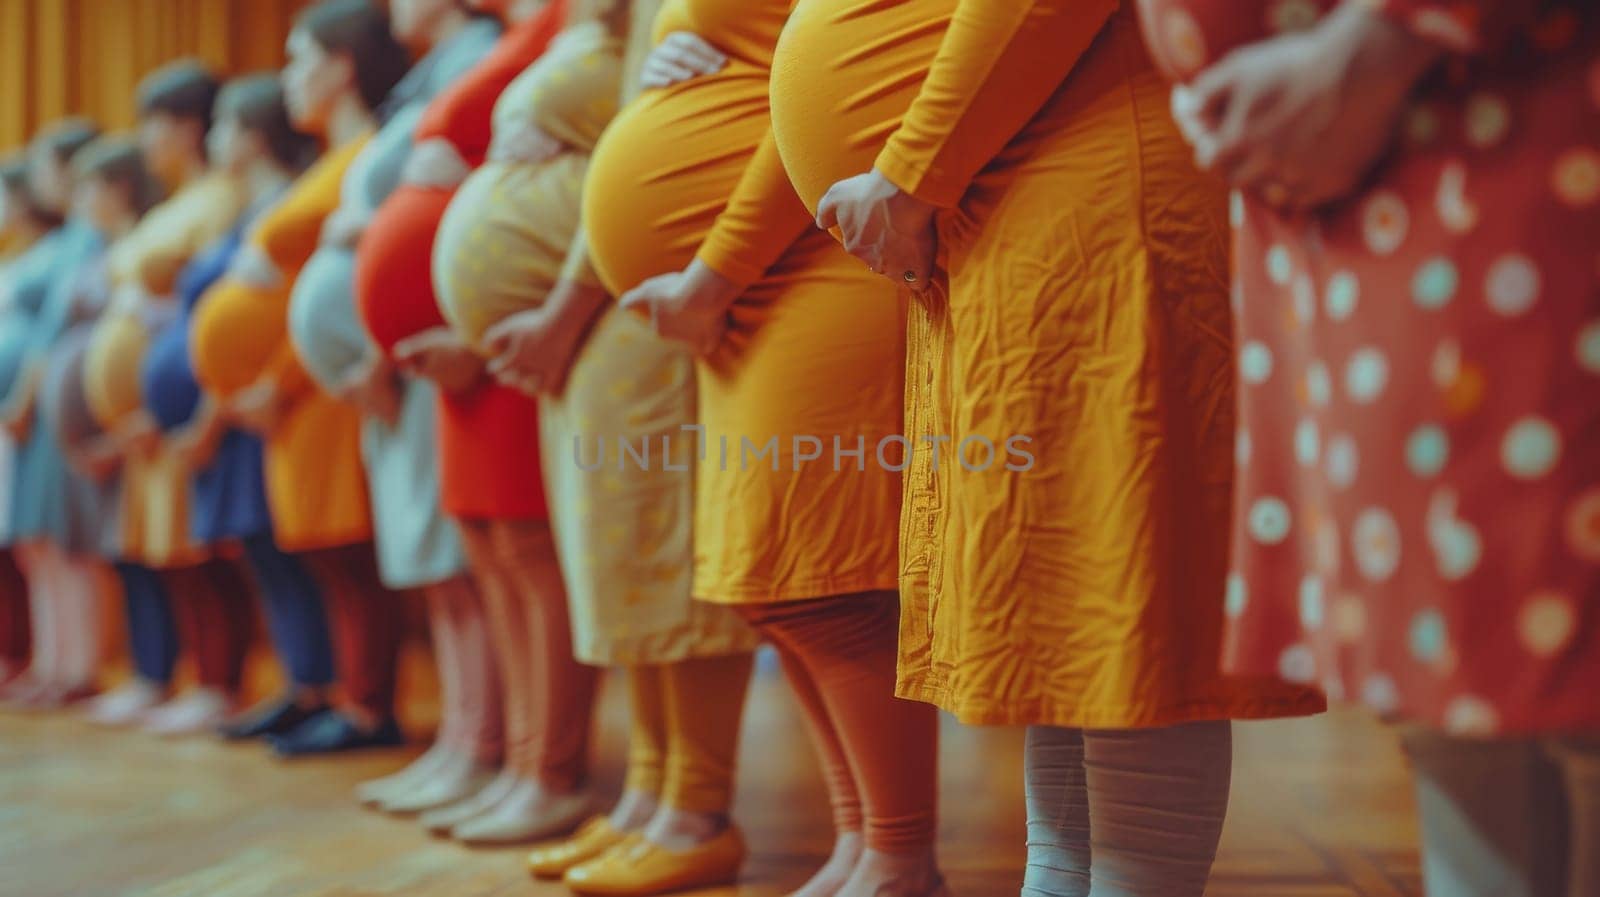 A group of pregnant women stand in a line, some wearing yellow dresses. Concept of unity and support among the women, as they stand together and share a common experience